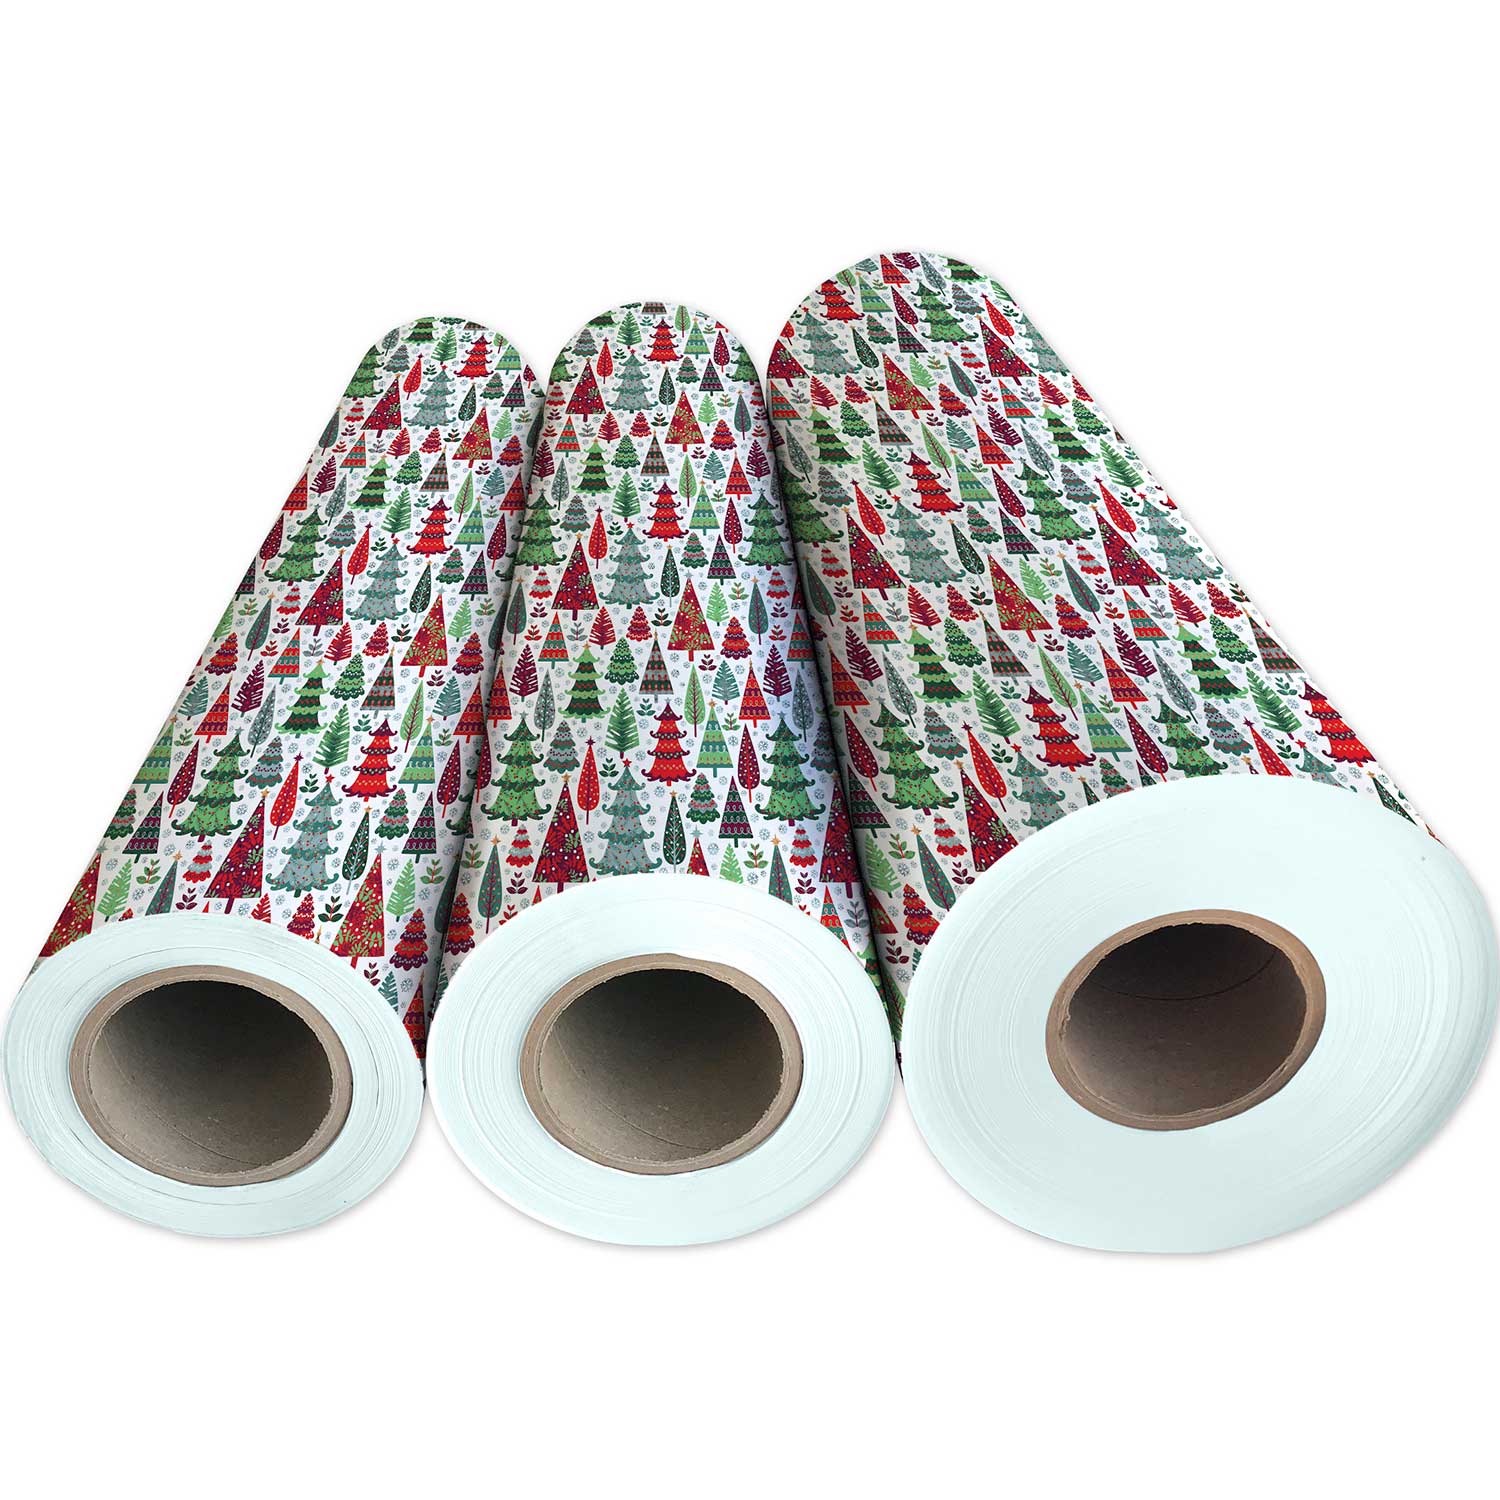 Vintage Department Store Christmas Tree, Ornament and Gift Holographic  Wrapping Paper Roll 24 Wide 